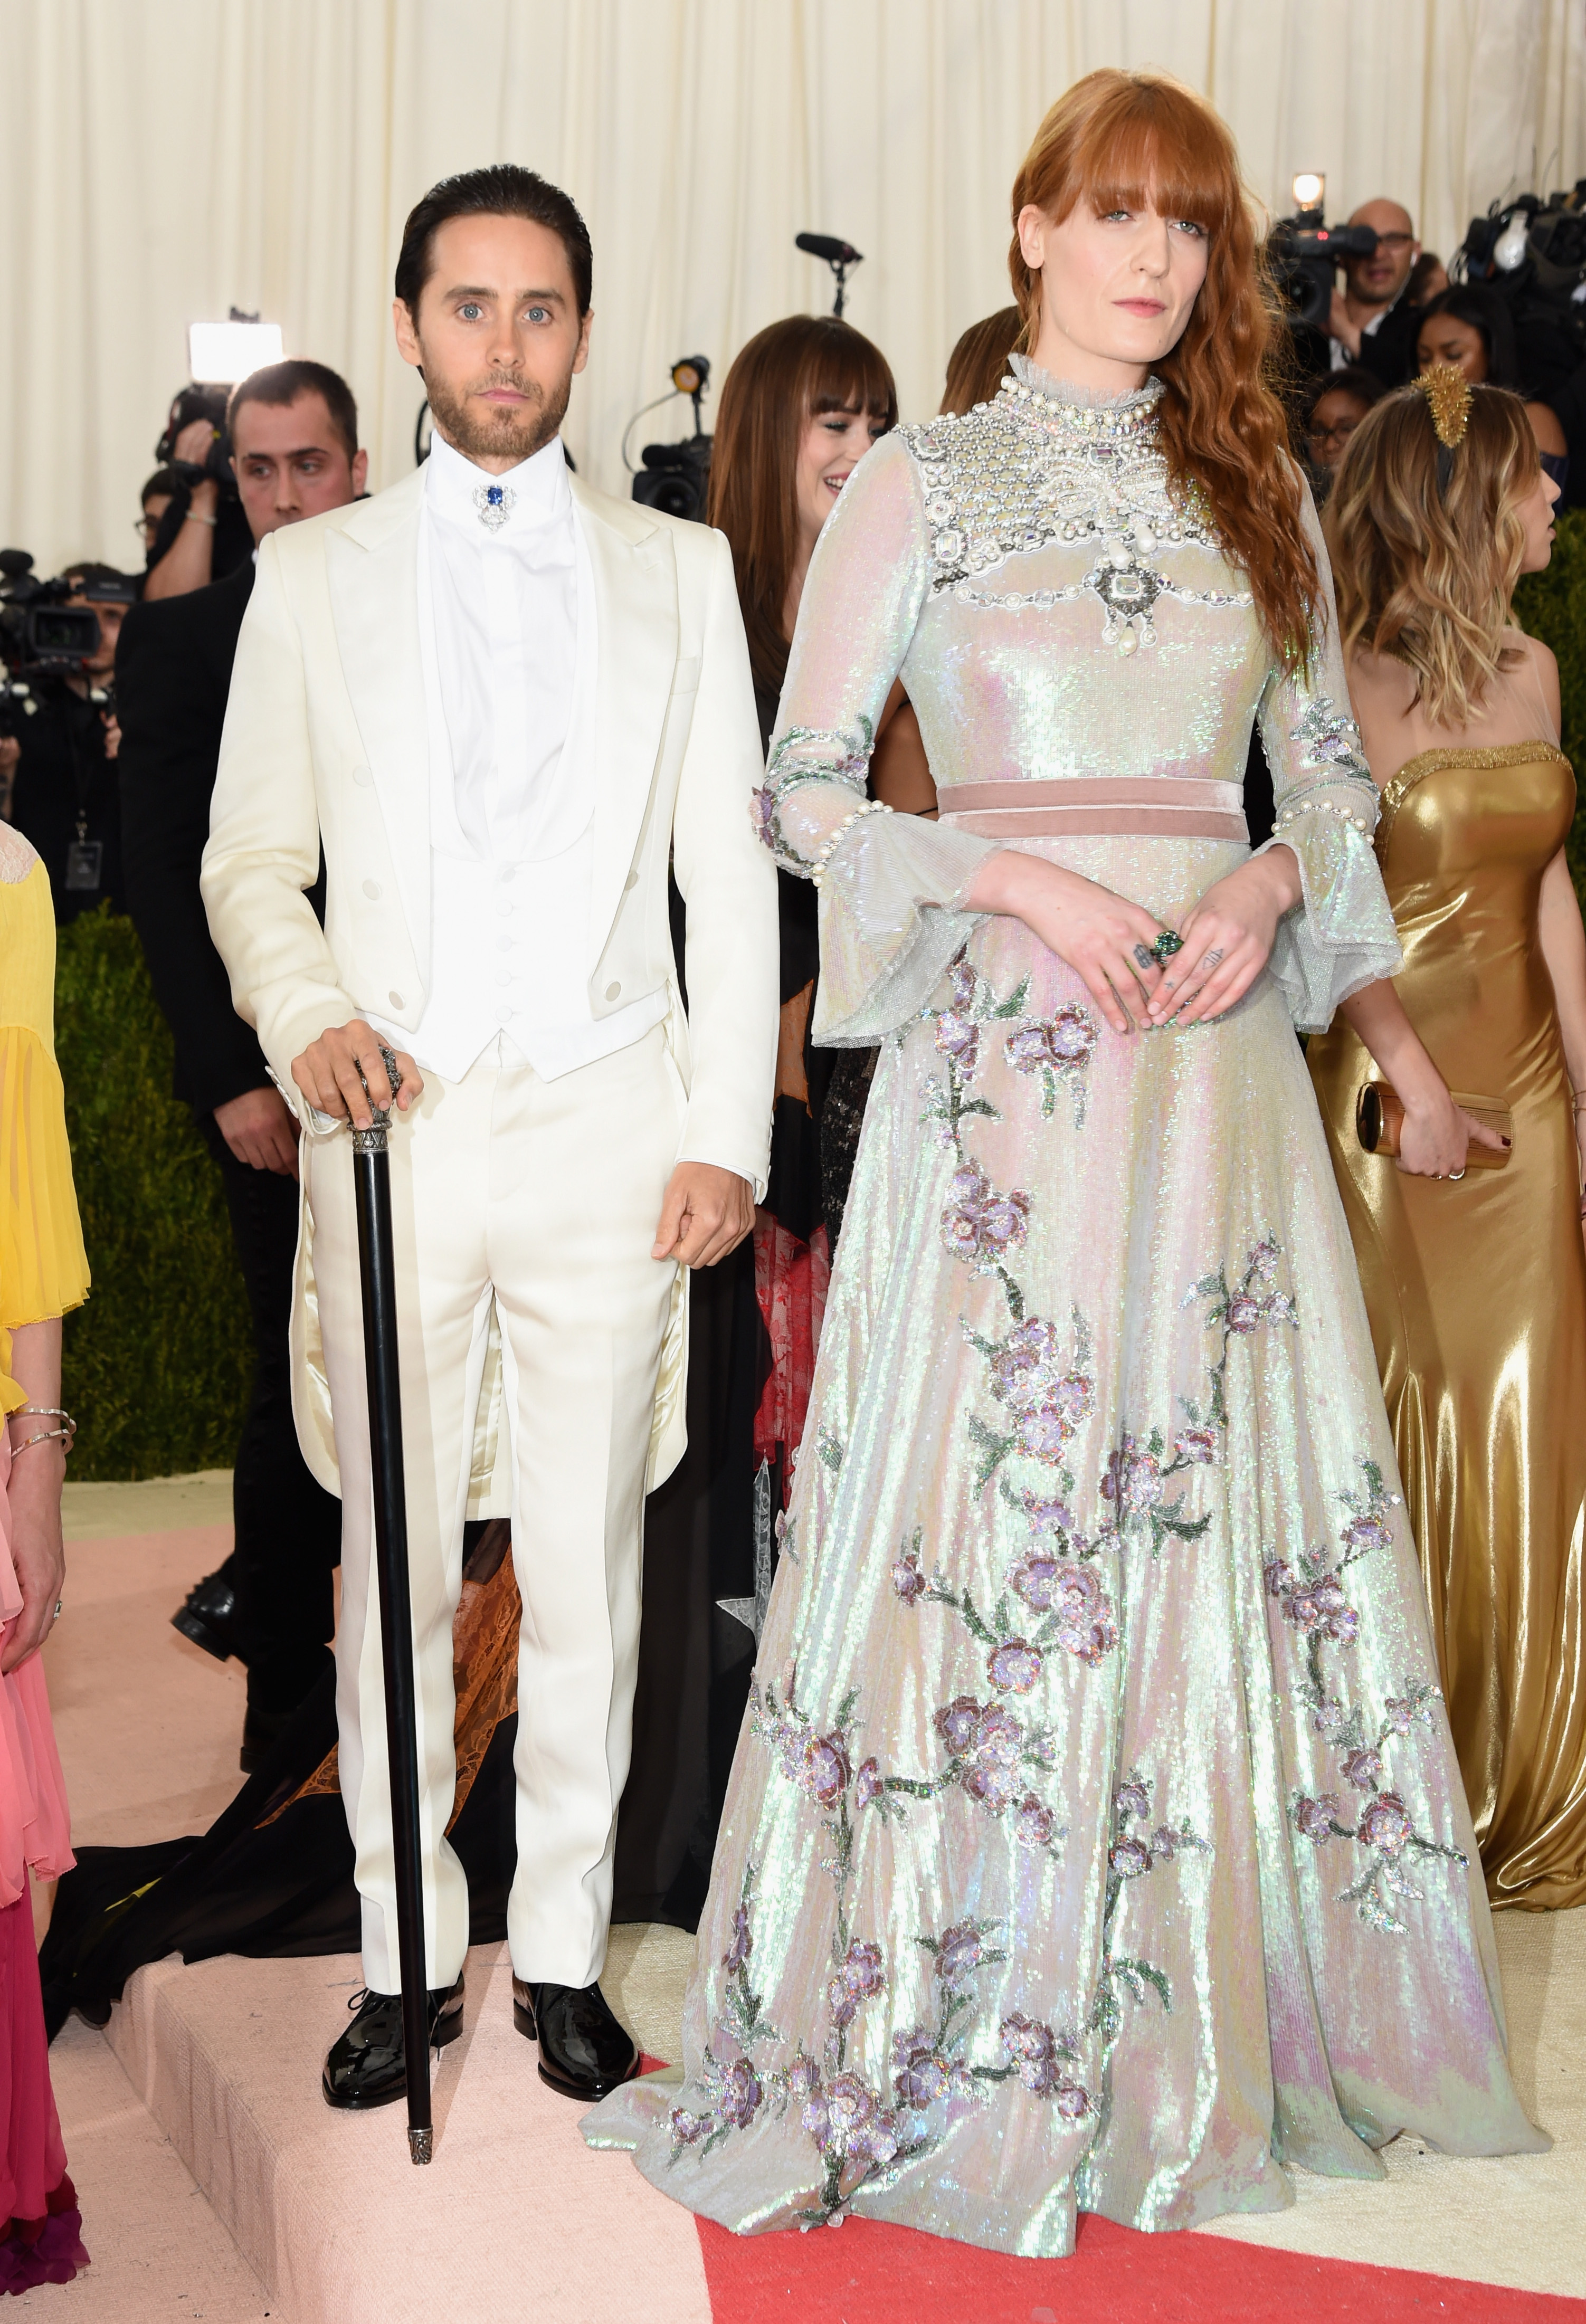 Jared Leto and Florence Welch attend  Manus x Machina: Fashion In An Age Of Technology  Costume Institute Gala at Metropolitan Museum of Art on May 2, 2016 in New York City.